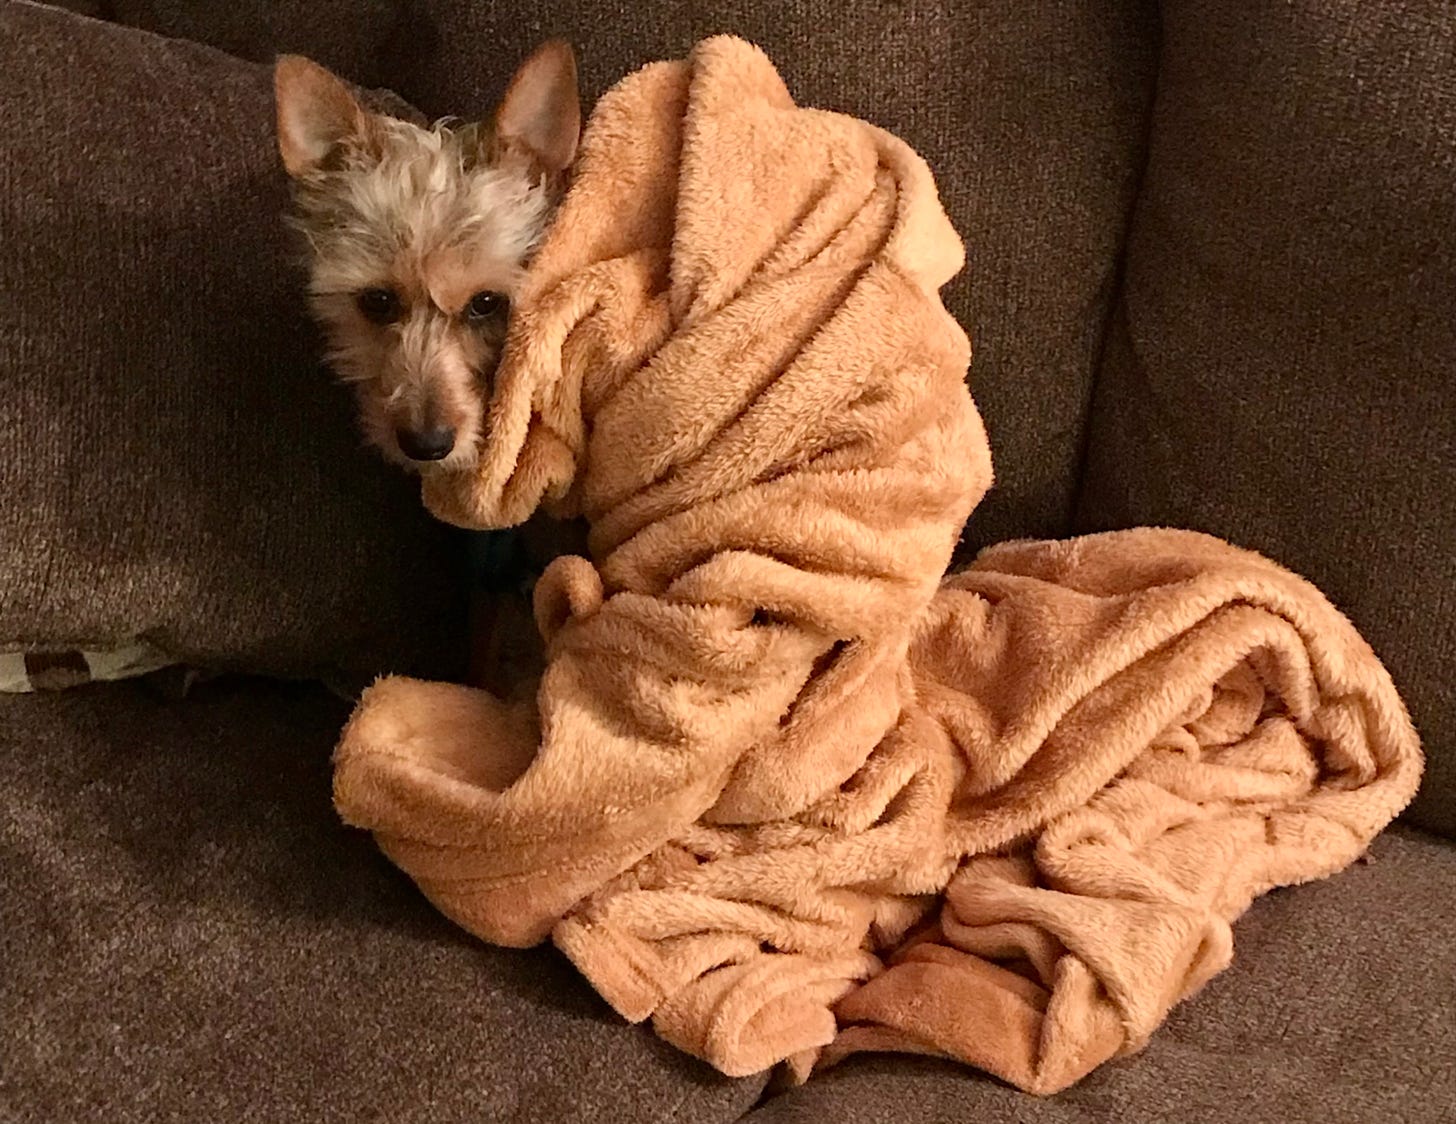 A small terrier wrapped up in a brown blanket as though it's a Jedi robe